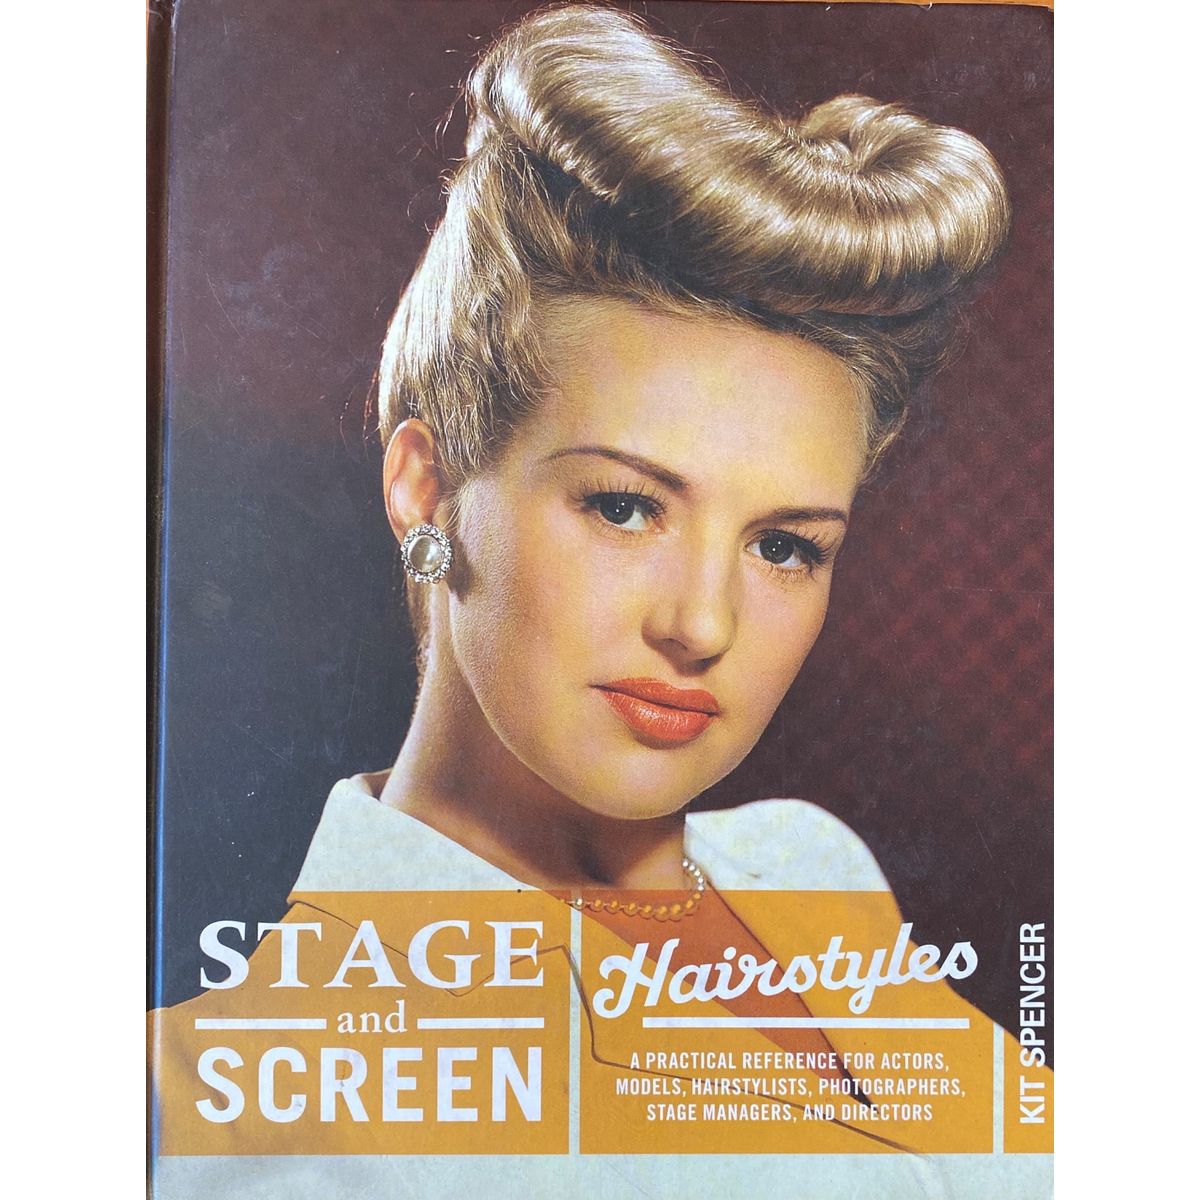 ISBN: 9780823084975 / 0823084973 - Stage and Screen Hairstyles: A Practical Reference for Actors, Models, Hair Stylists, Photographers, Stage Managers, and Directors by Kit Spencer [2009]